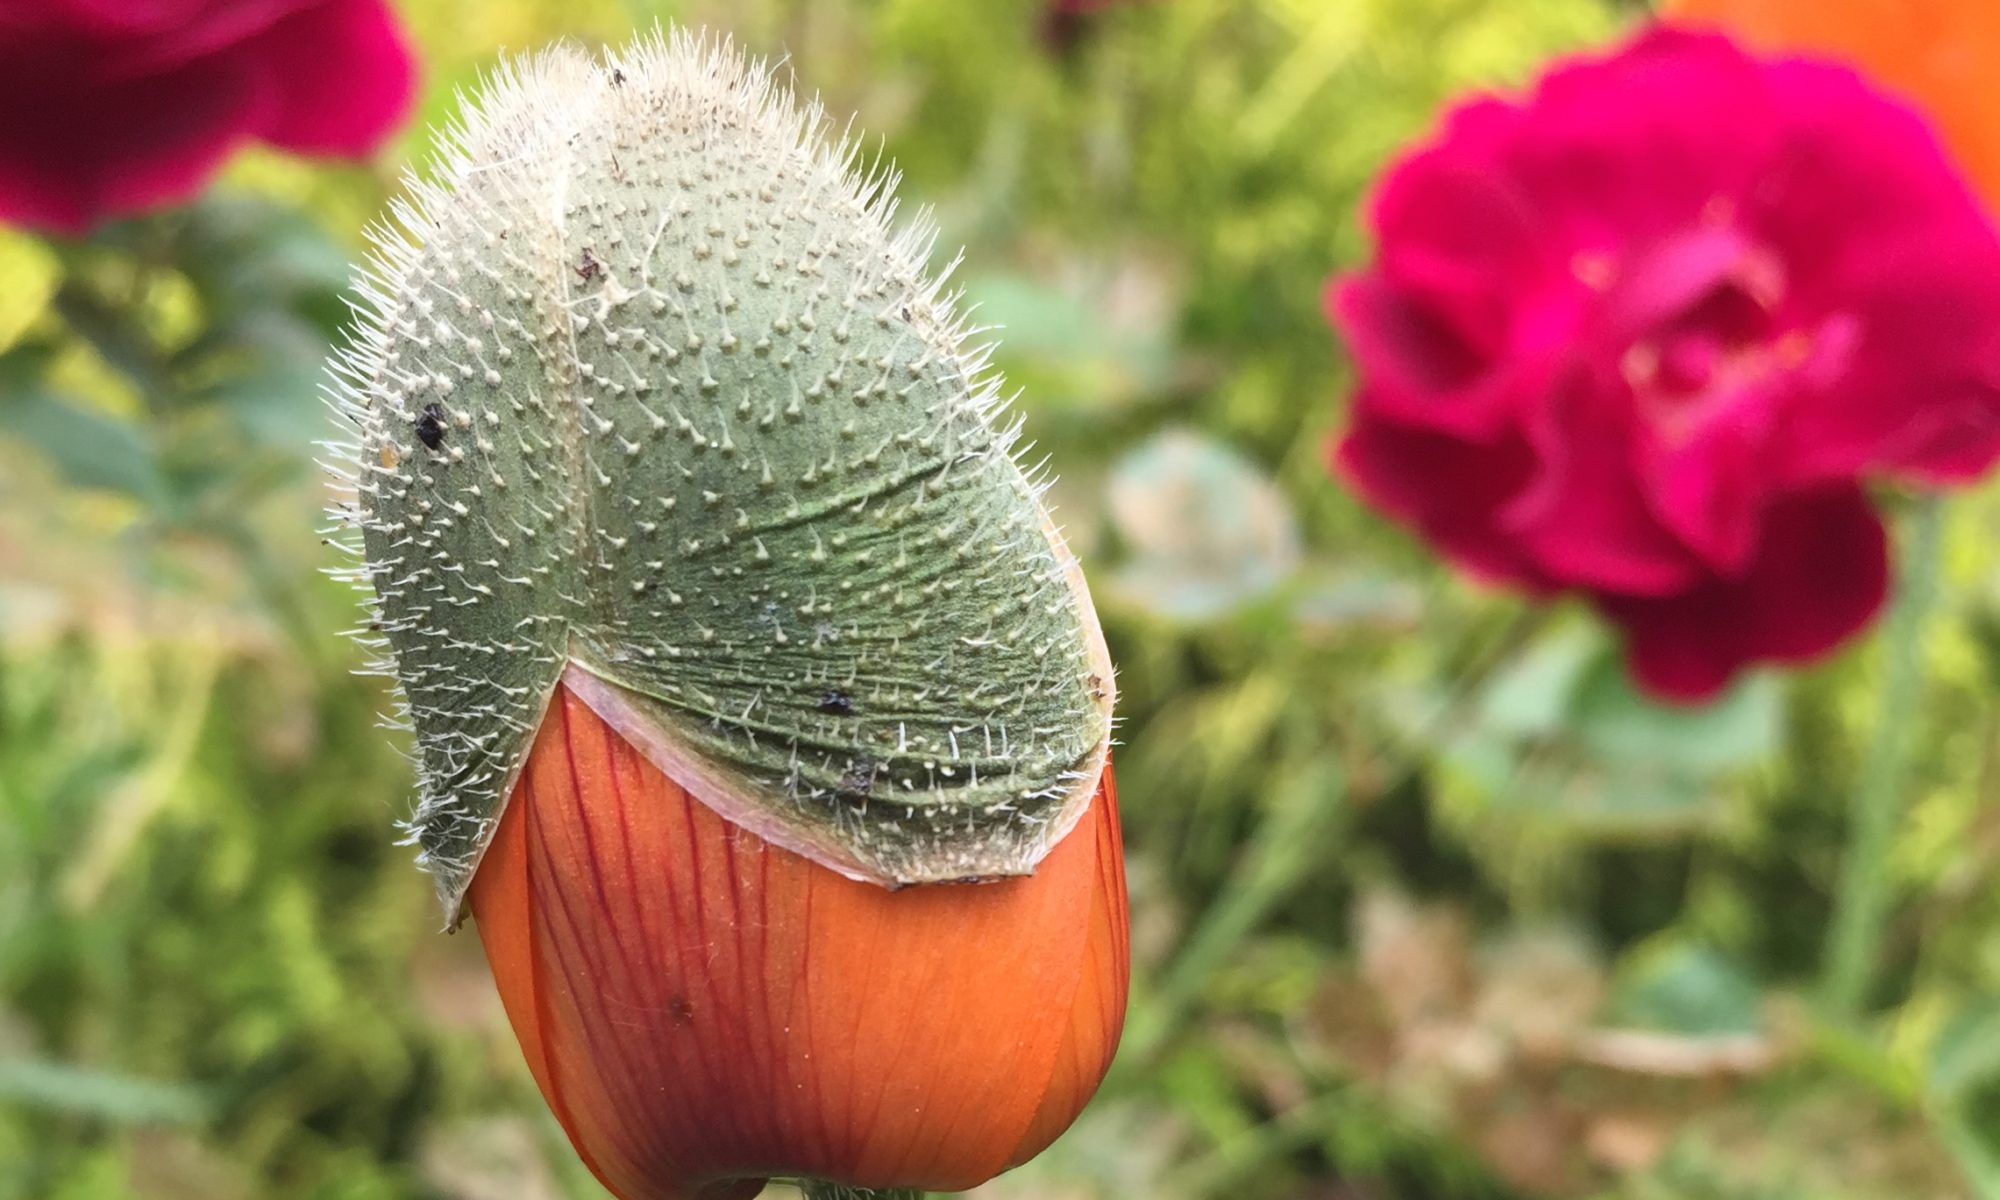 A close up of the flower bud of an orange poppy.